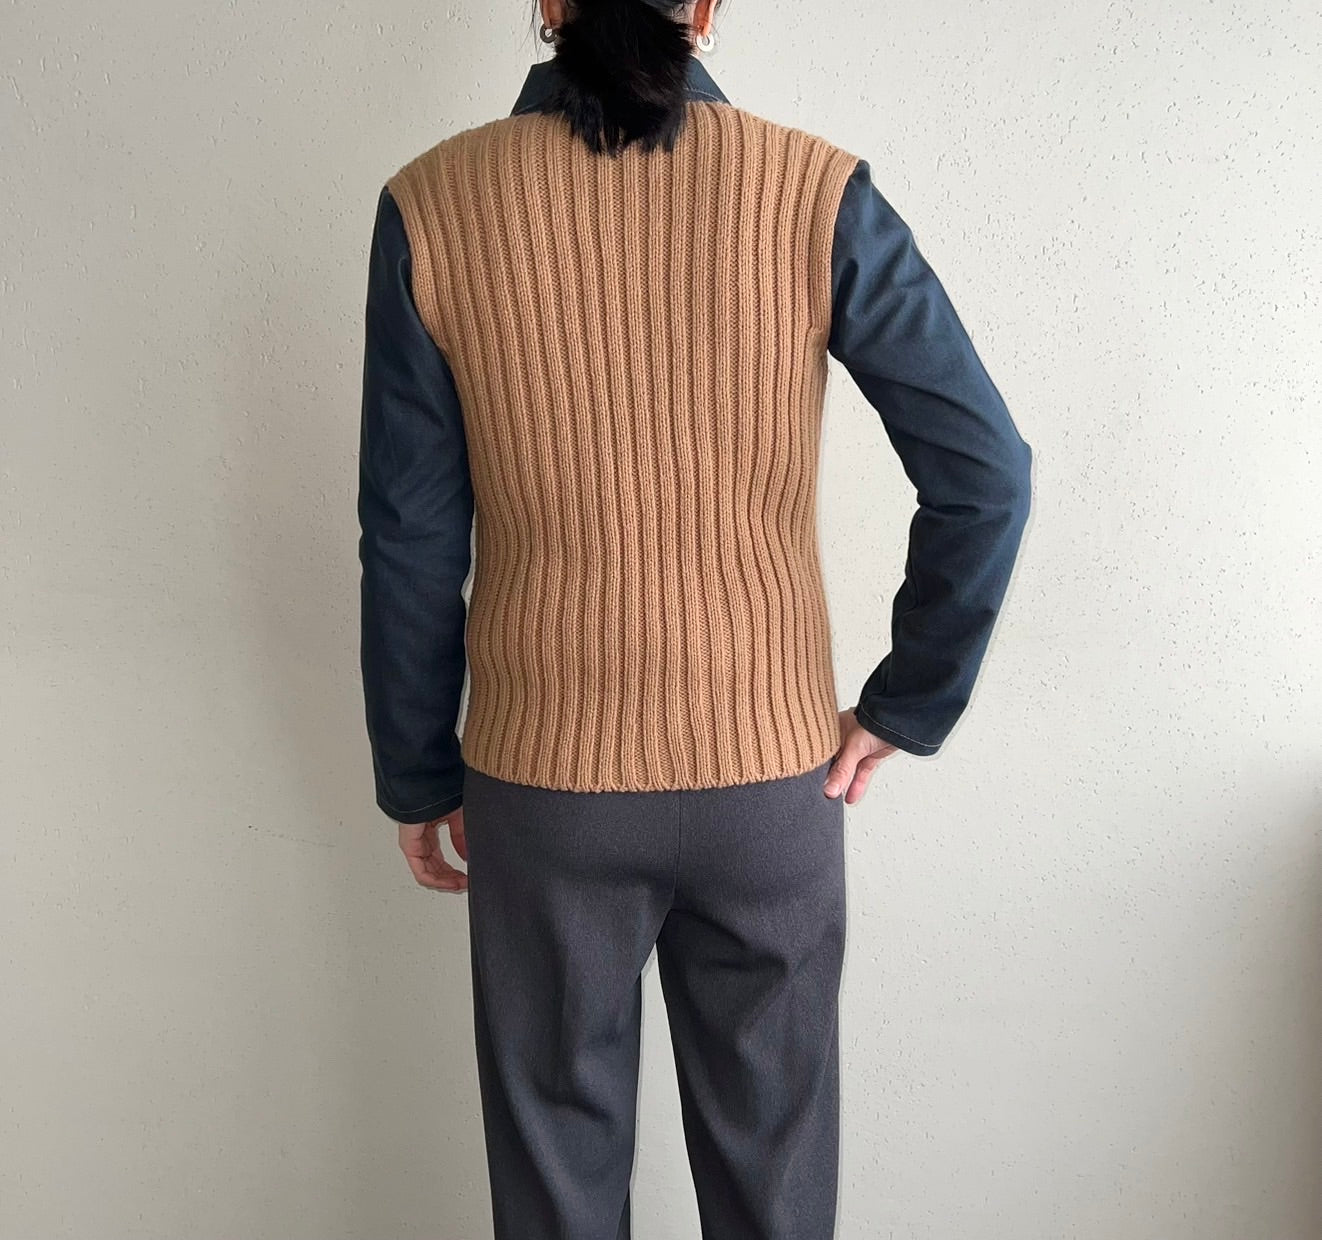 90s Ribbed Jacket Made in Italy